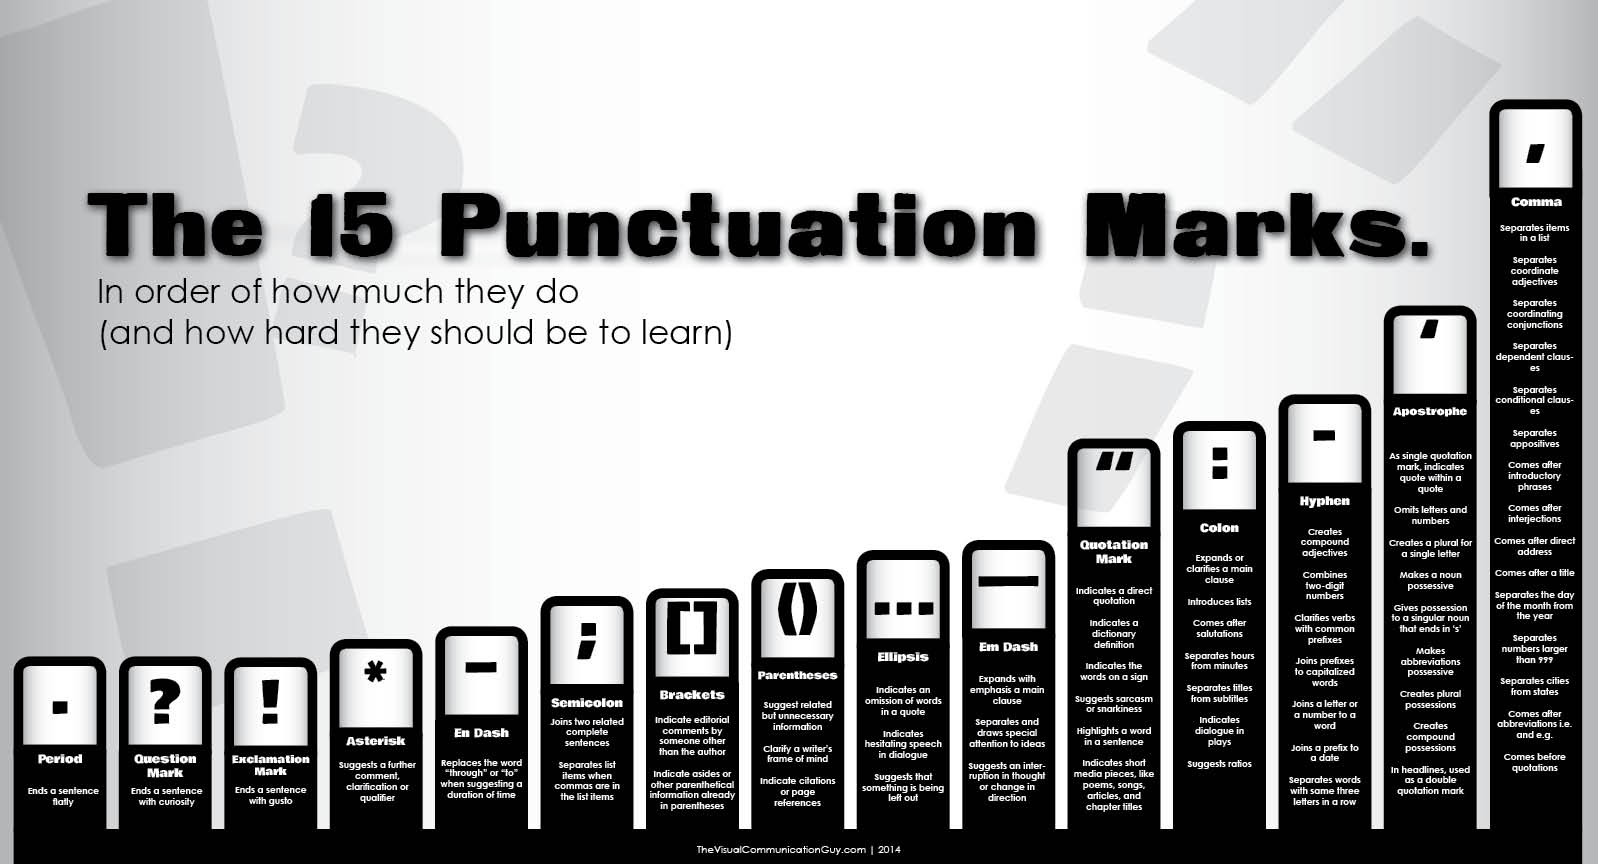 Punctuation marks chart